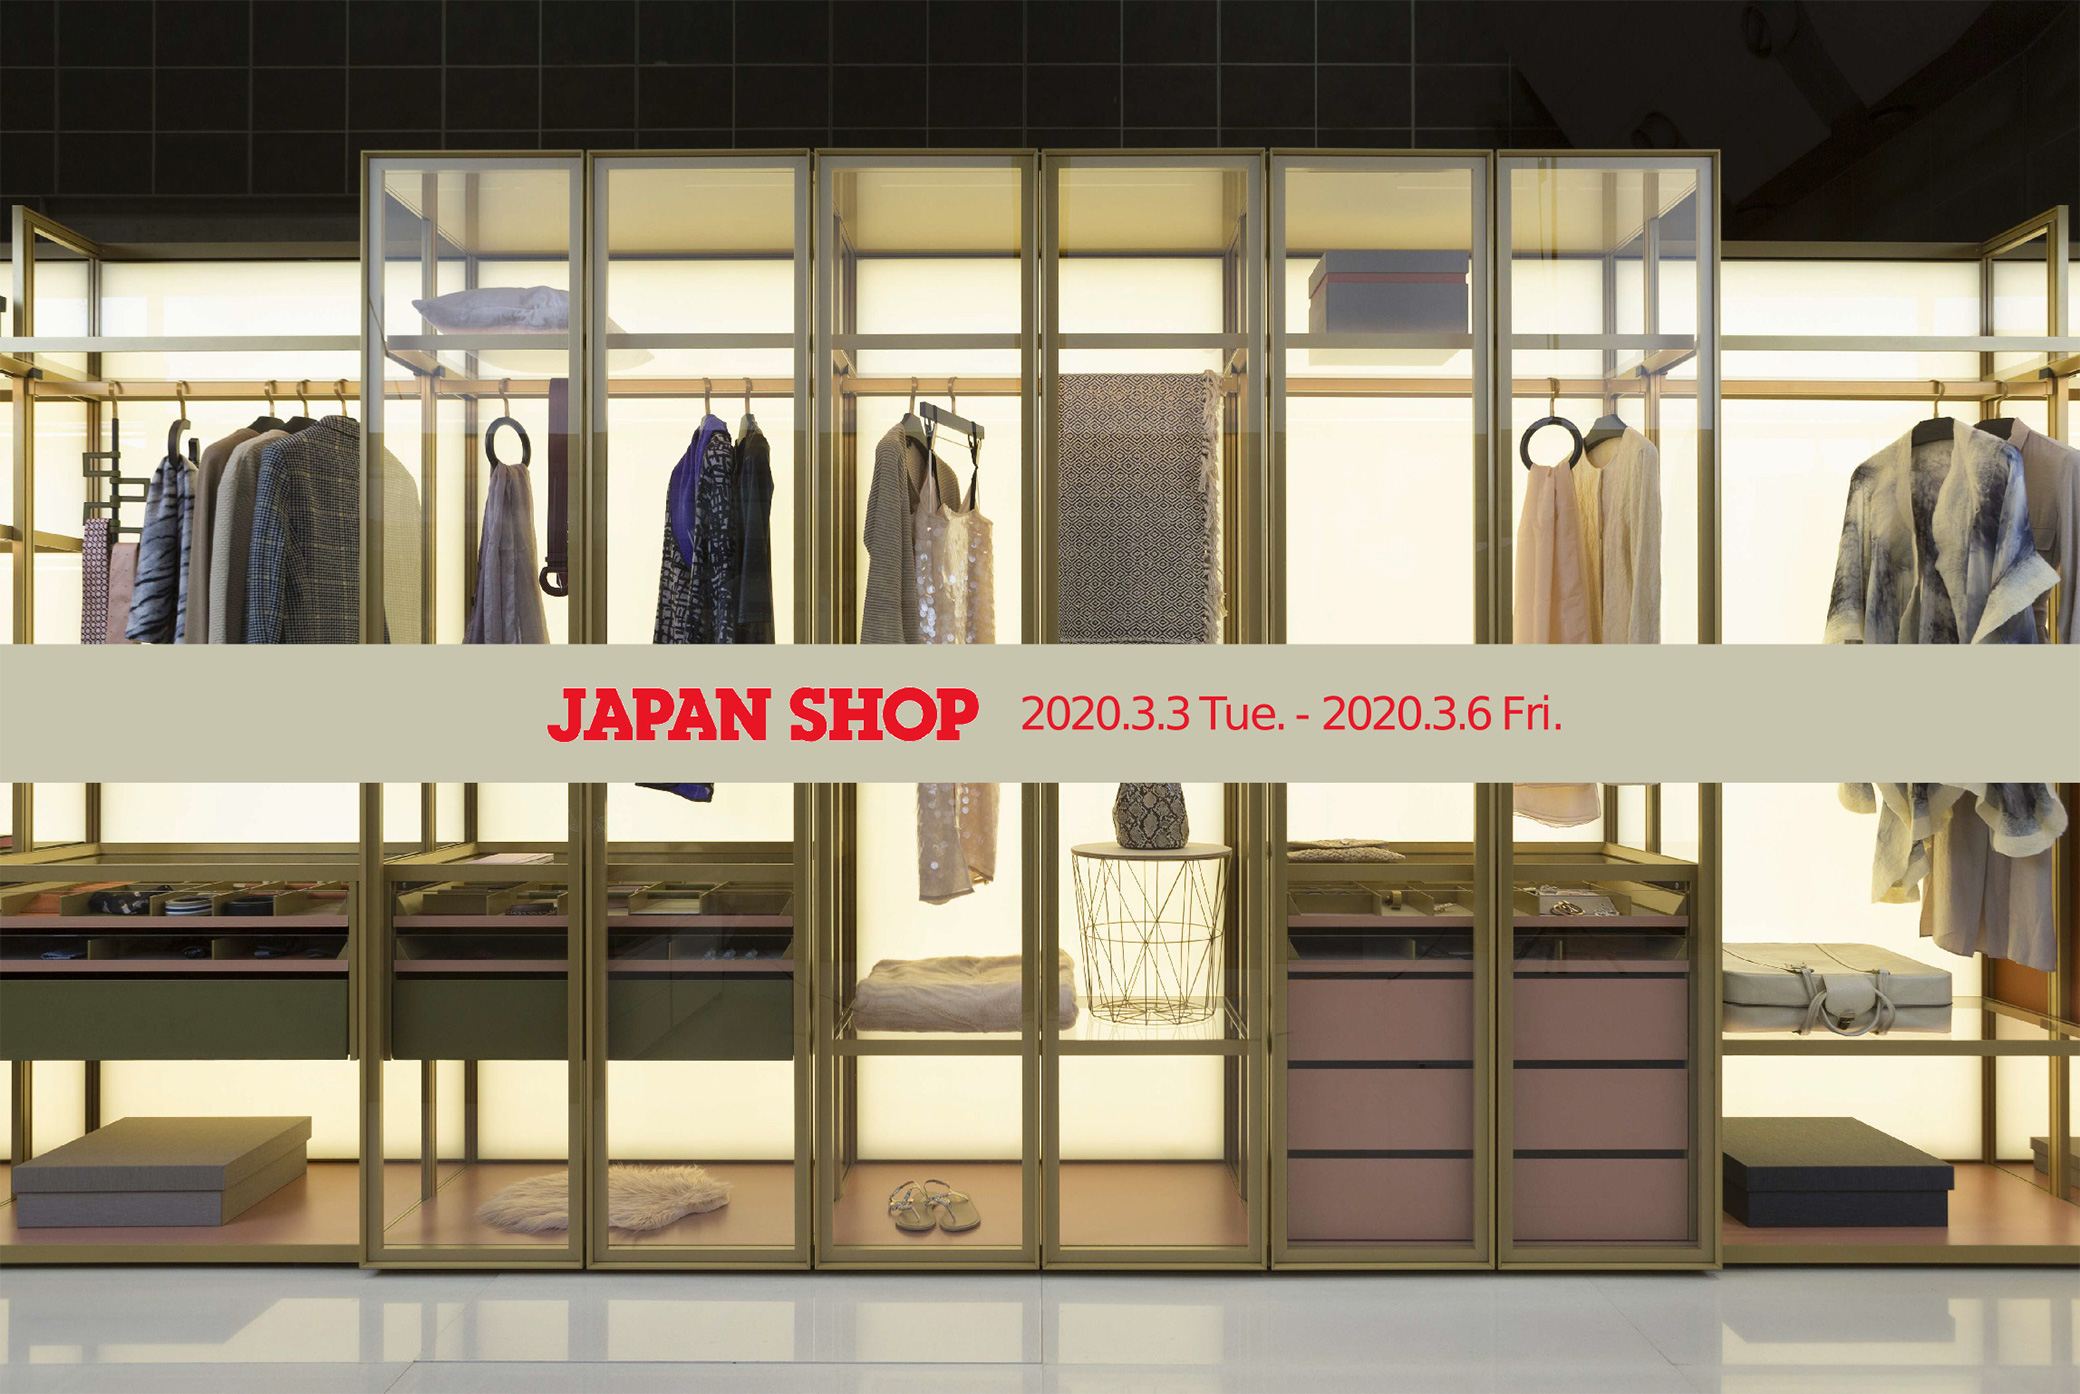 We will exhibit at JAPAN SHOP 2020 from Mar. 3rd to 6th!